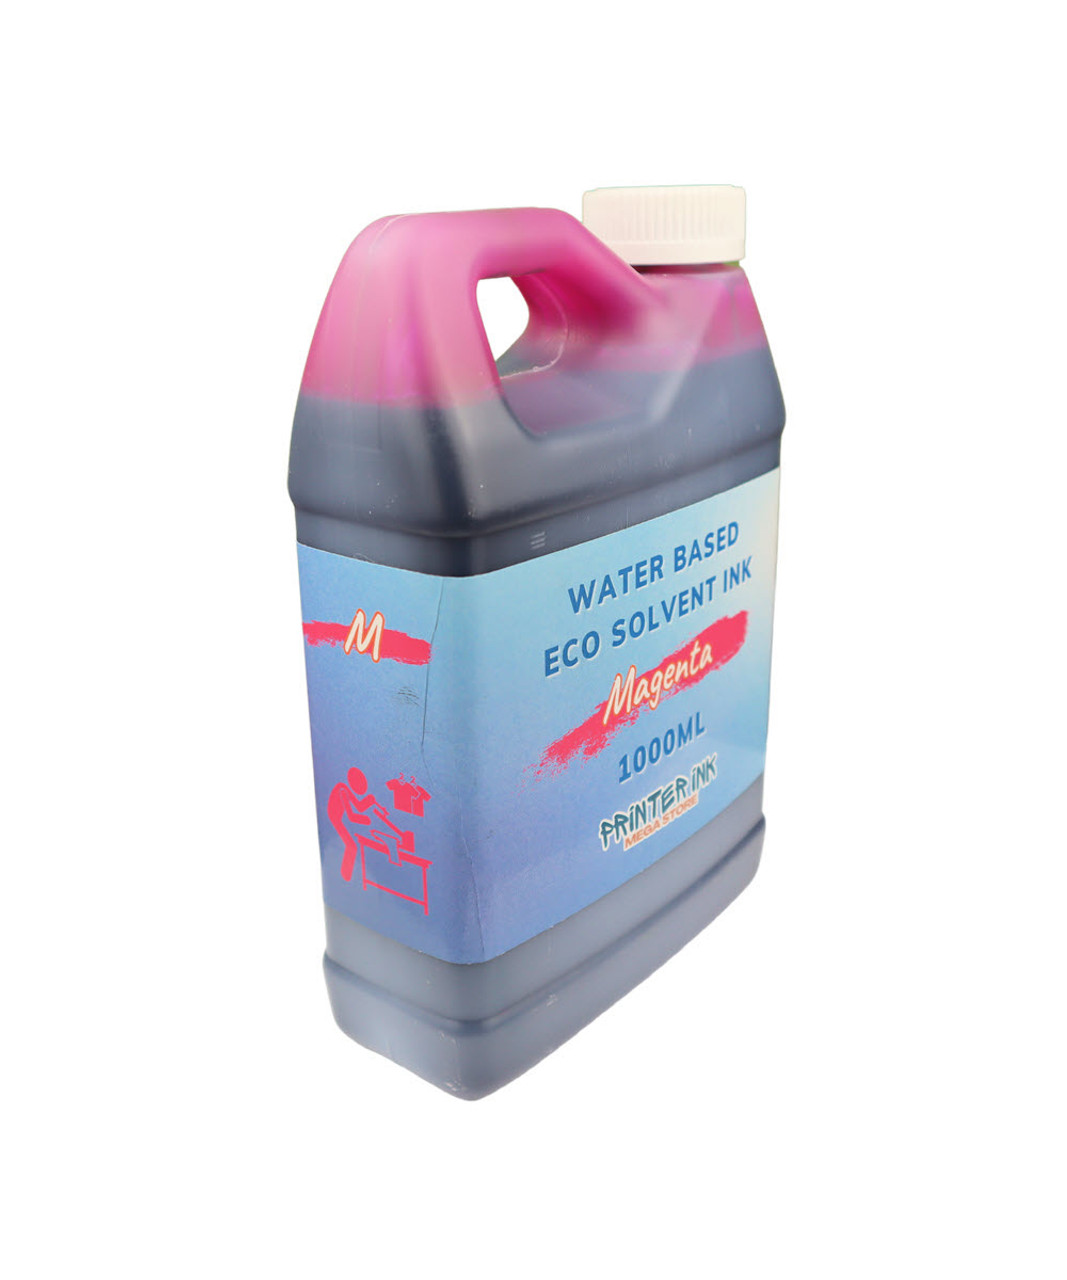 Magenta Water Based Eco Solvent Ink 1000ml Bottle for Epson SureColor T3270 T5270 T7270 Printers